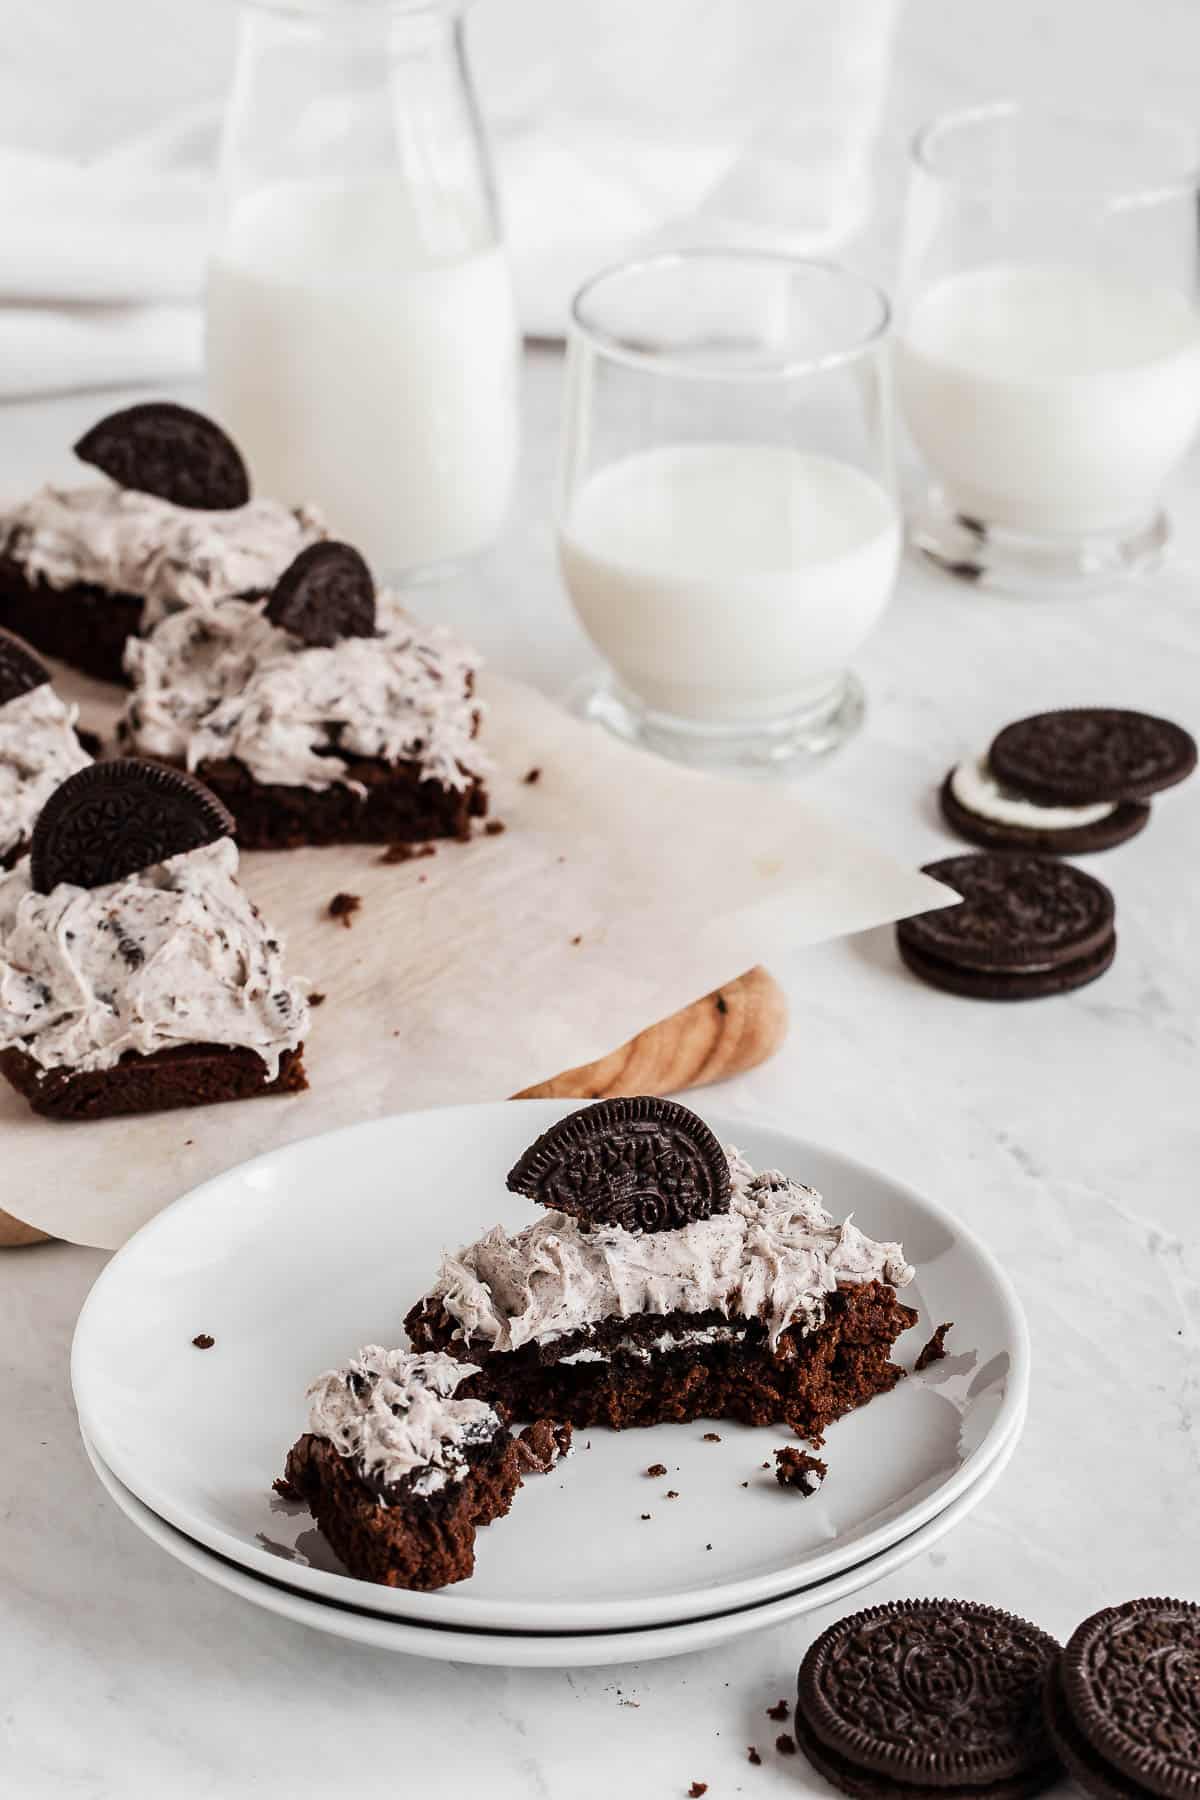 Pan of oreos cut into serving pieces with a glass of milk.